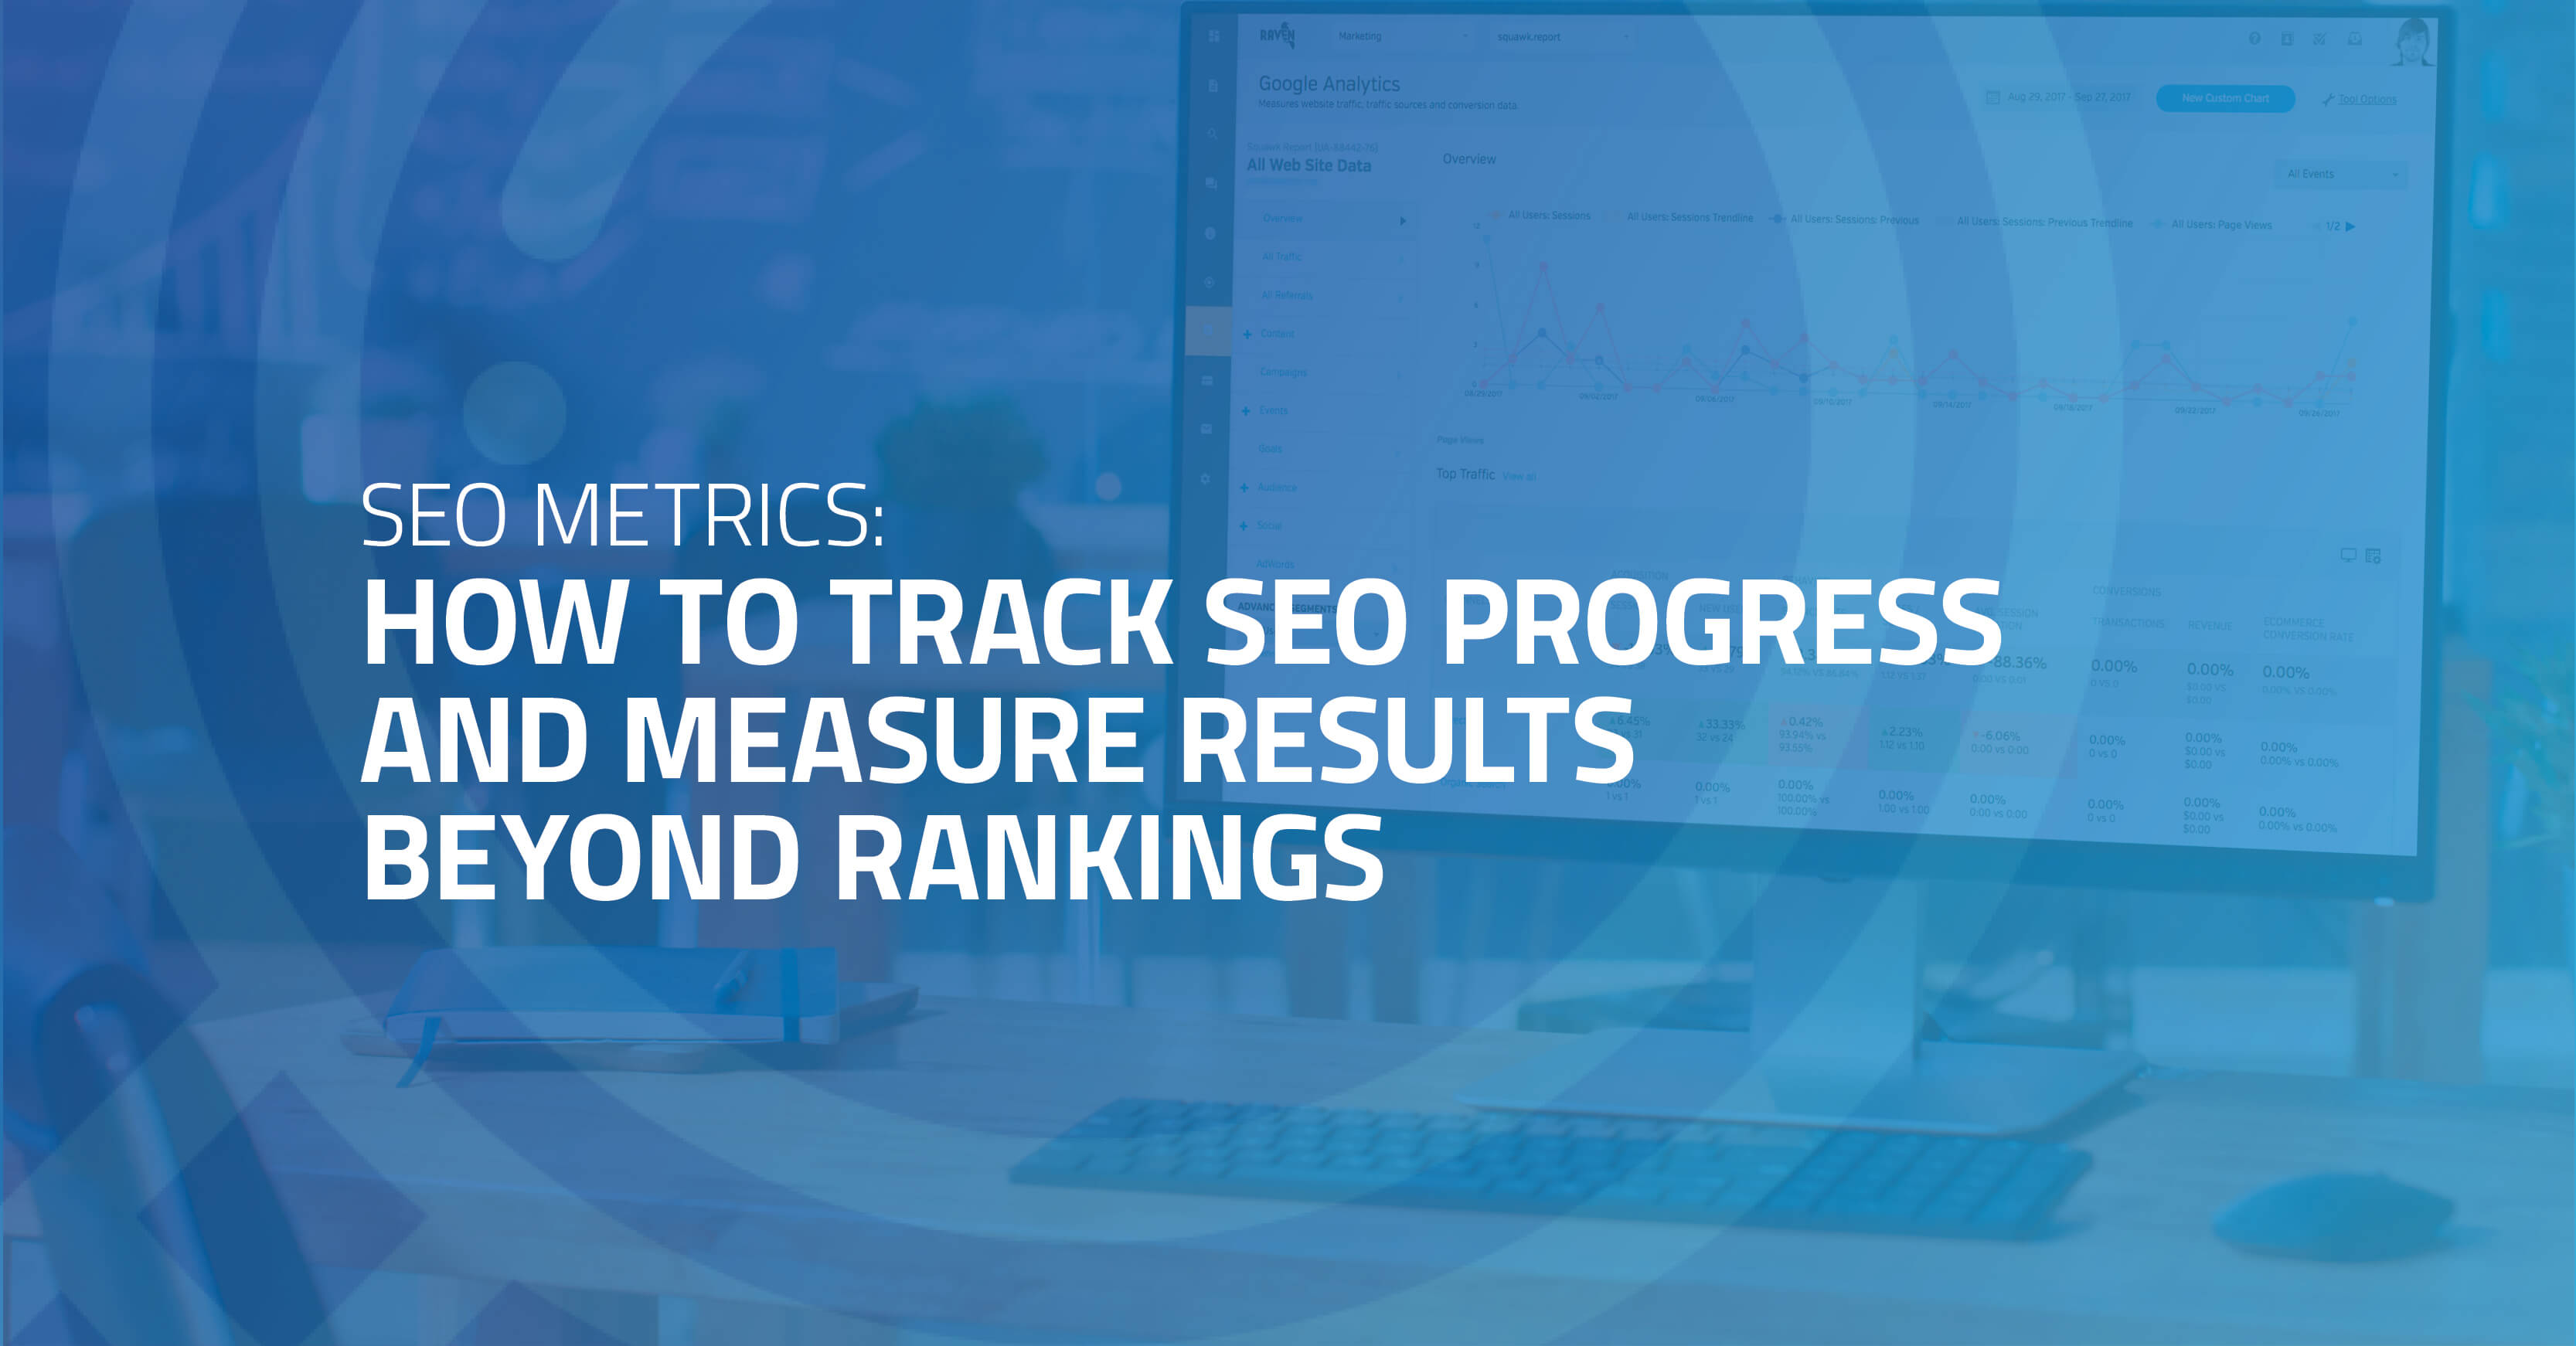 How to Track SEO Progress and Measure Results Beyond Rankings